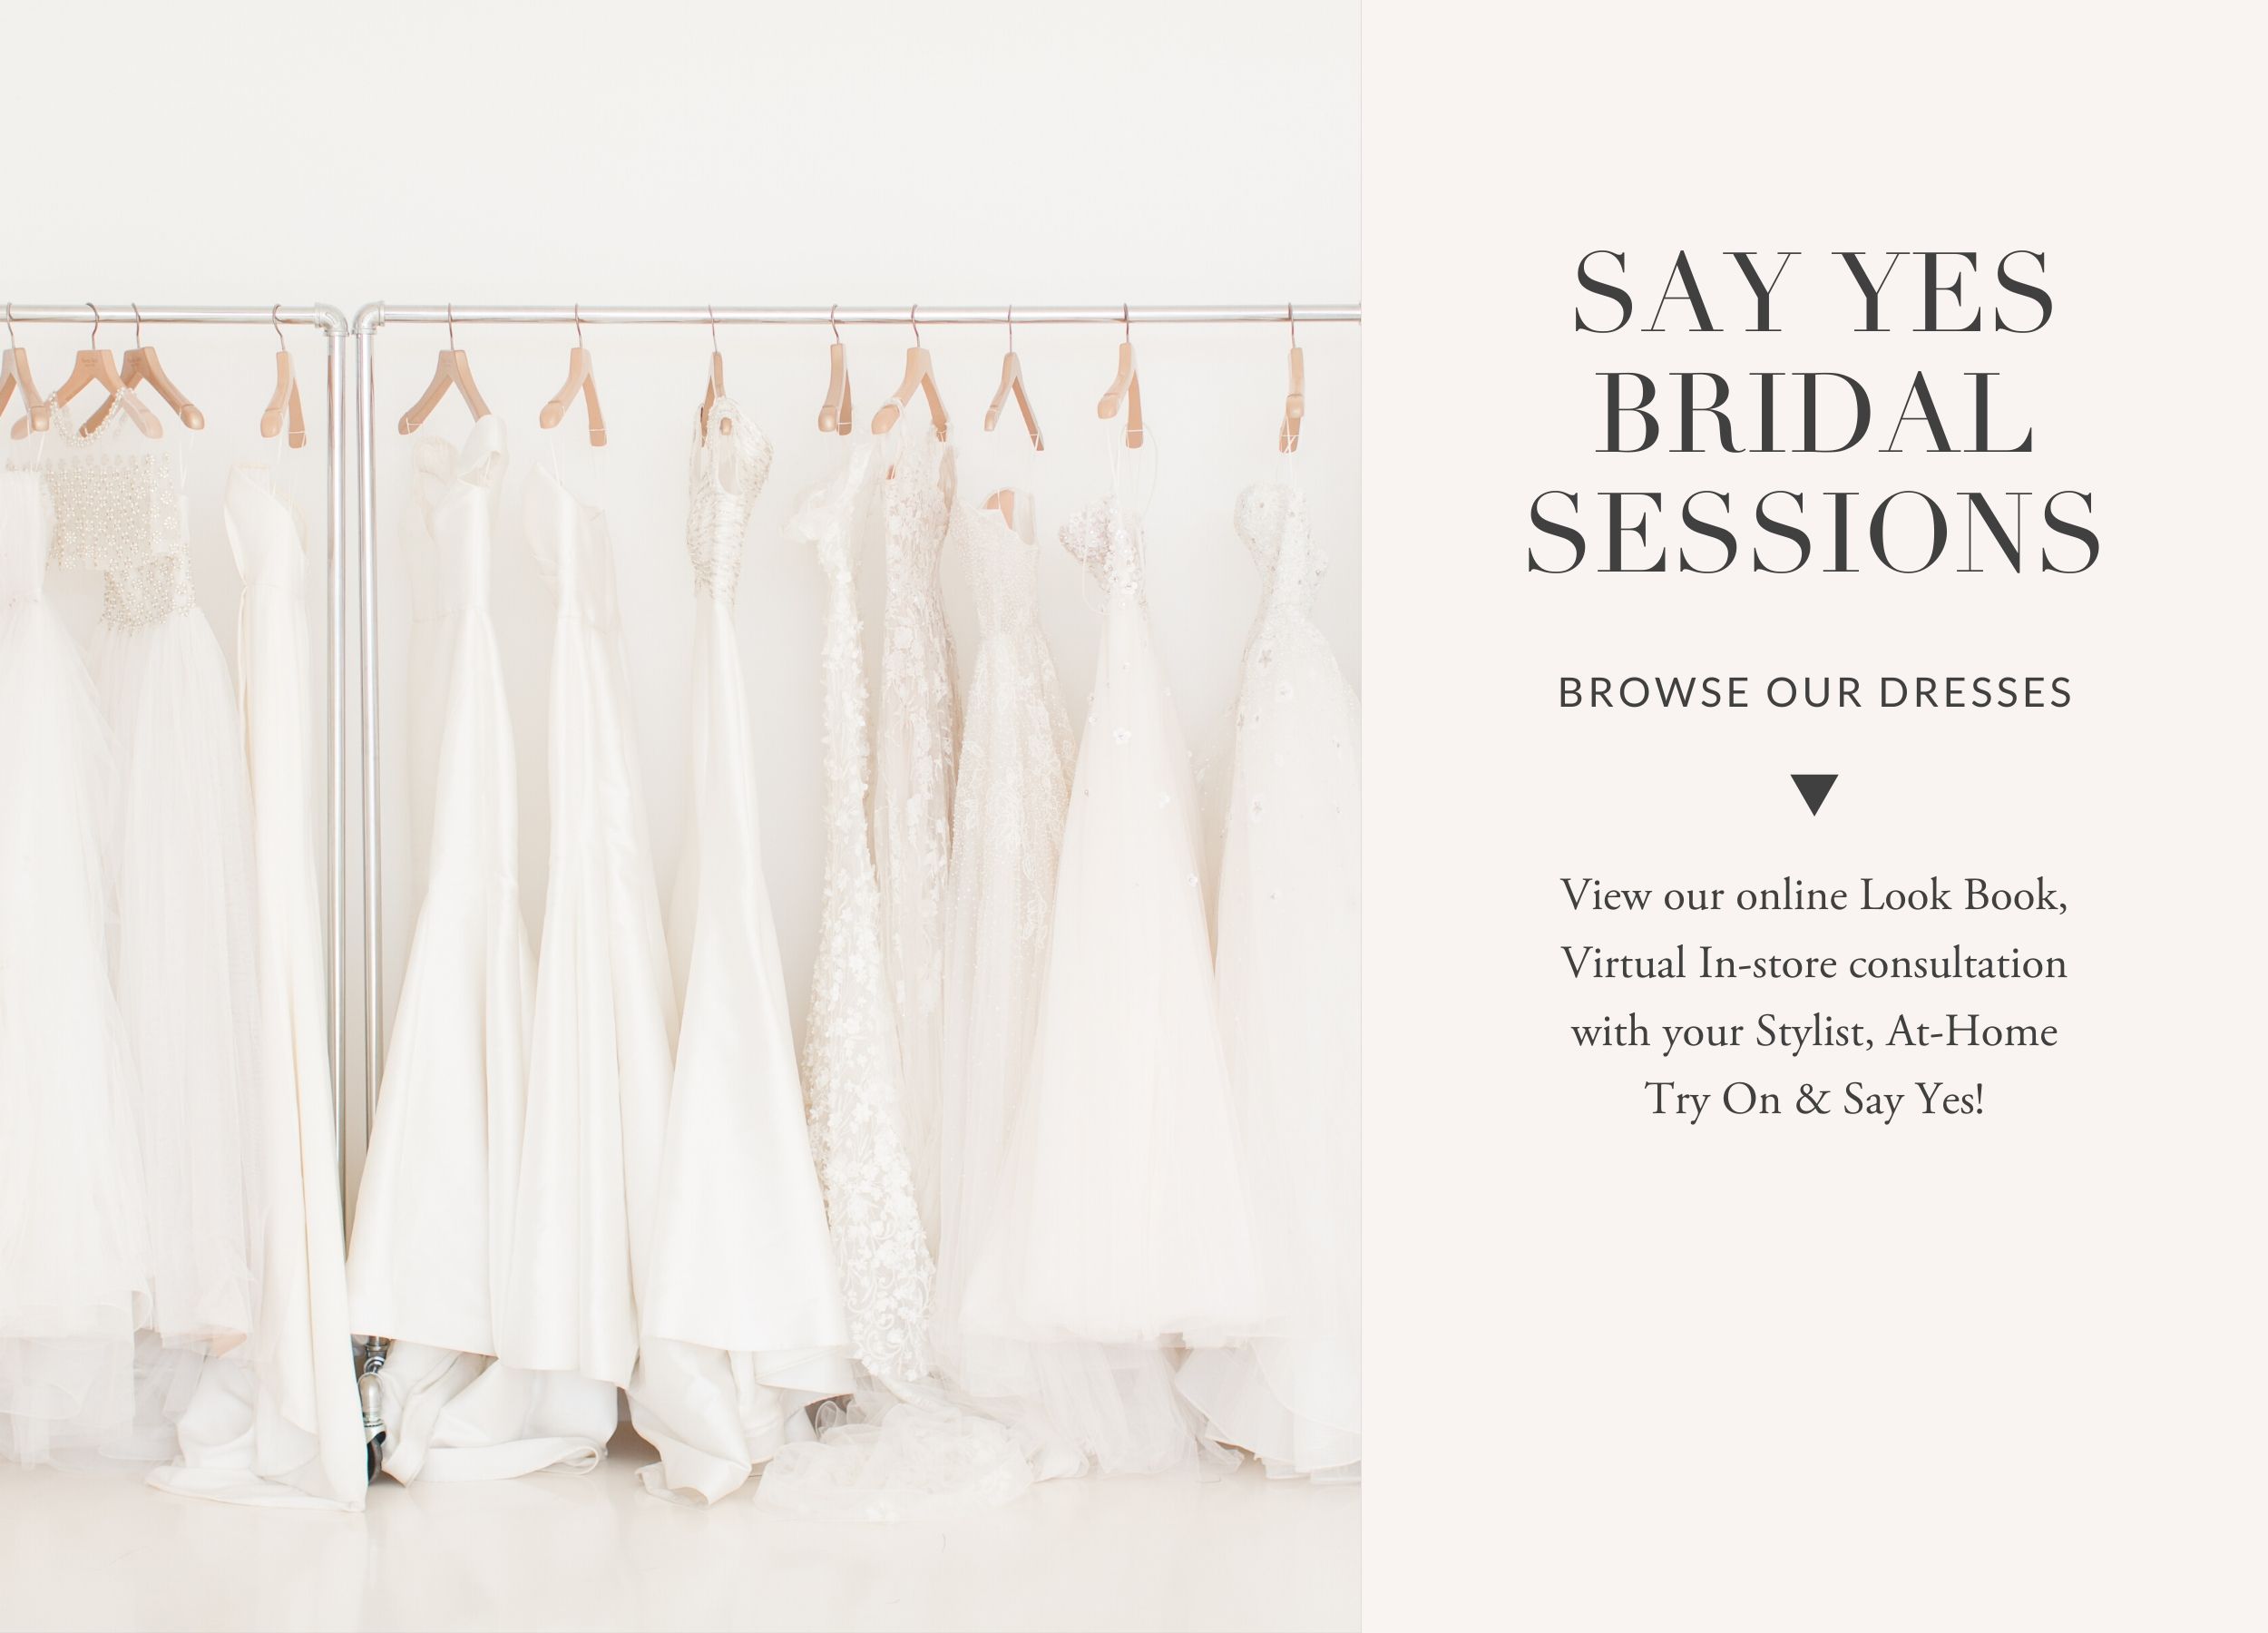 Say Yes Bridal Dress Sessions